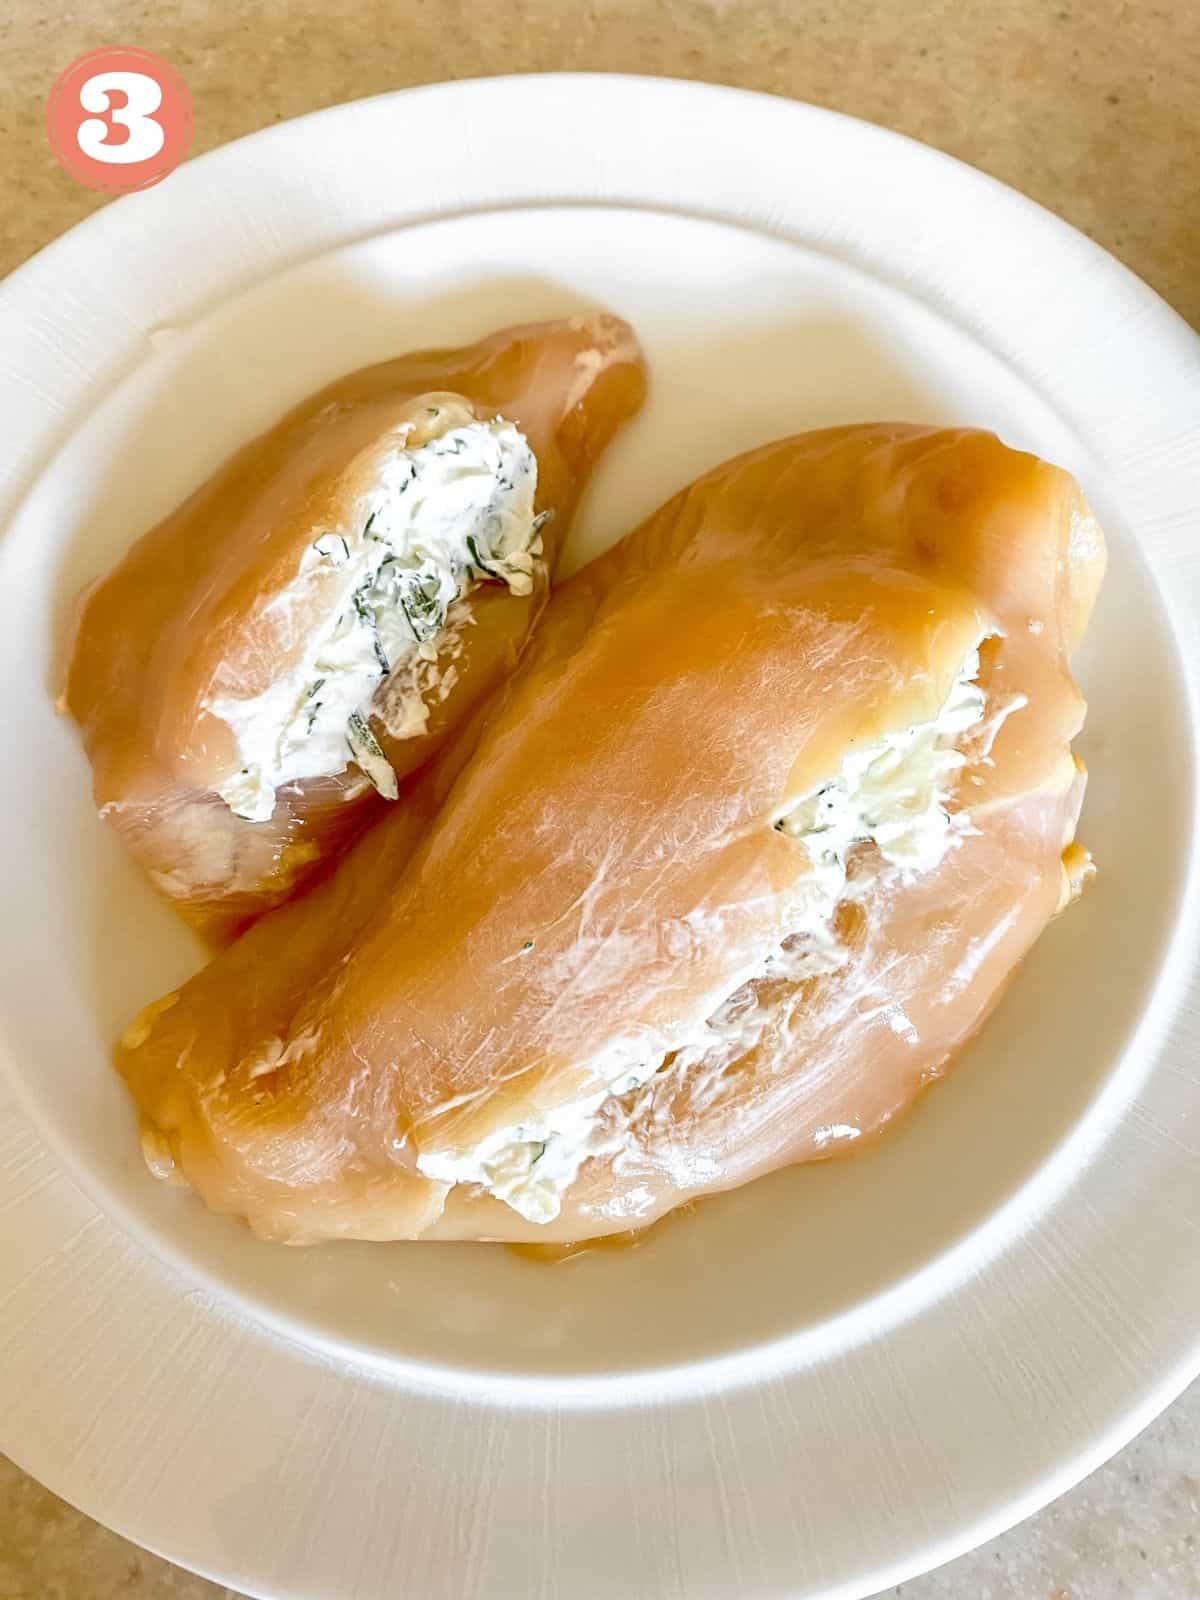 two chicken breasts stuffed with herb cream cheese labelled number three.